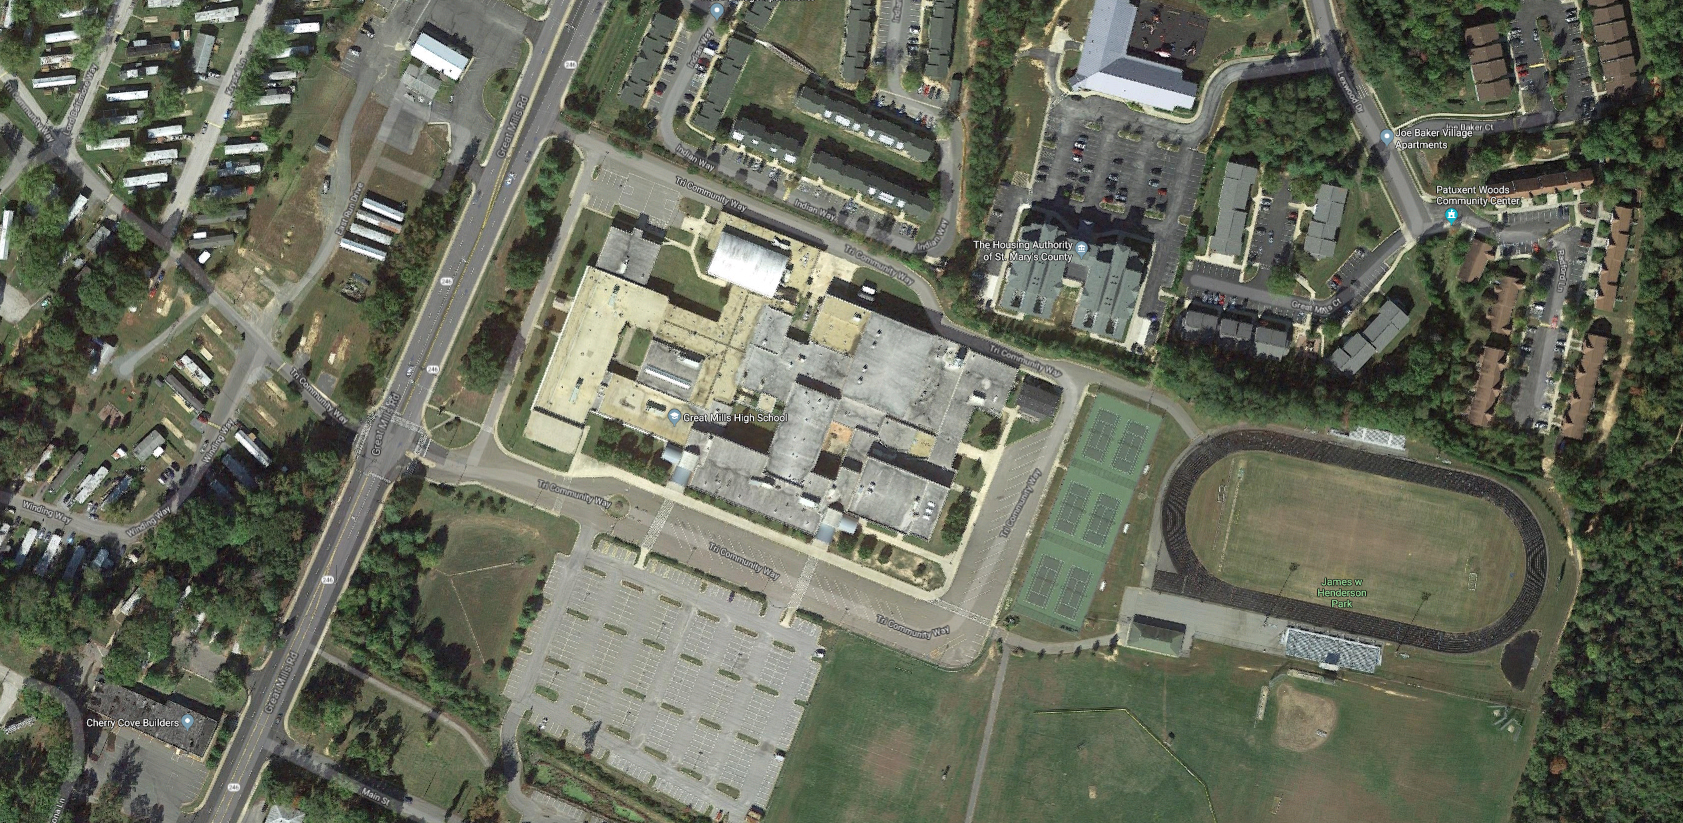 PHOTO: A Google map shows the location of Great Mills High School in Great Mills, M.D.